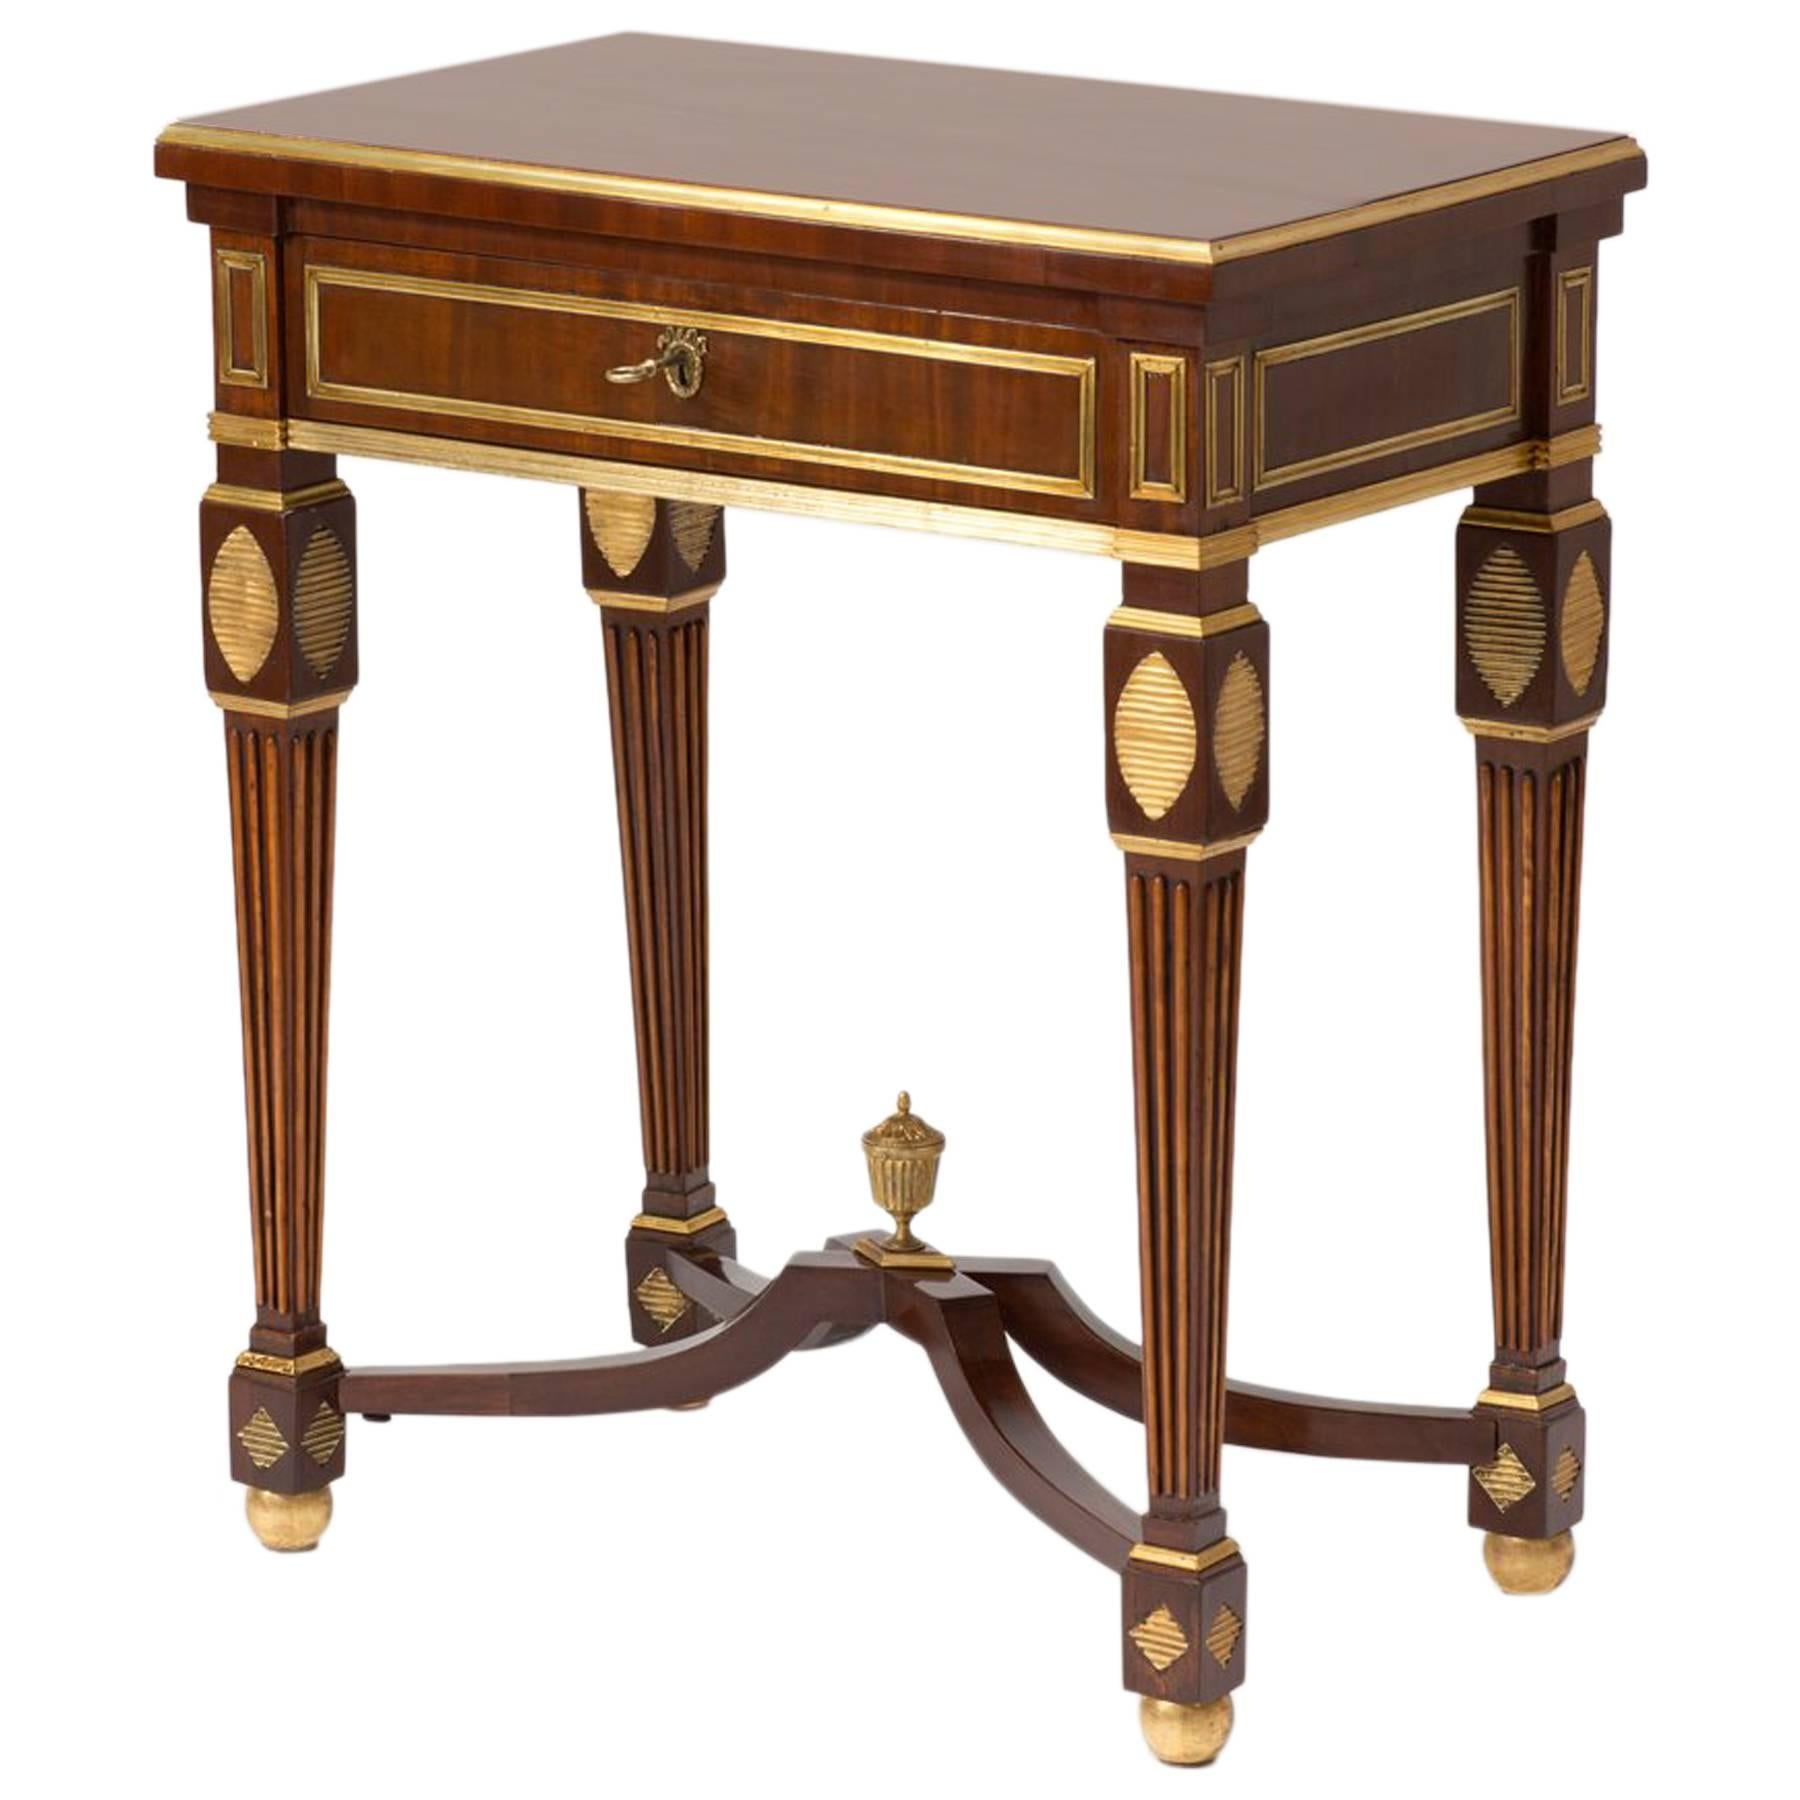 Antique Classicism Russian Mahogany Table with Brass, 18th Century For Sale